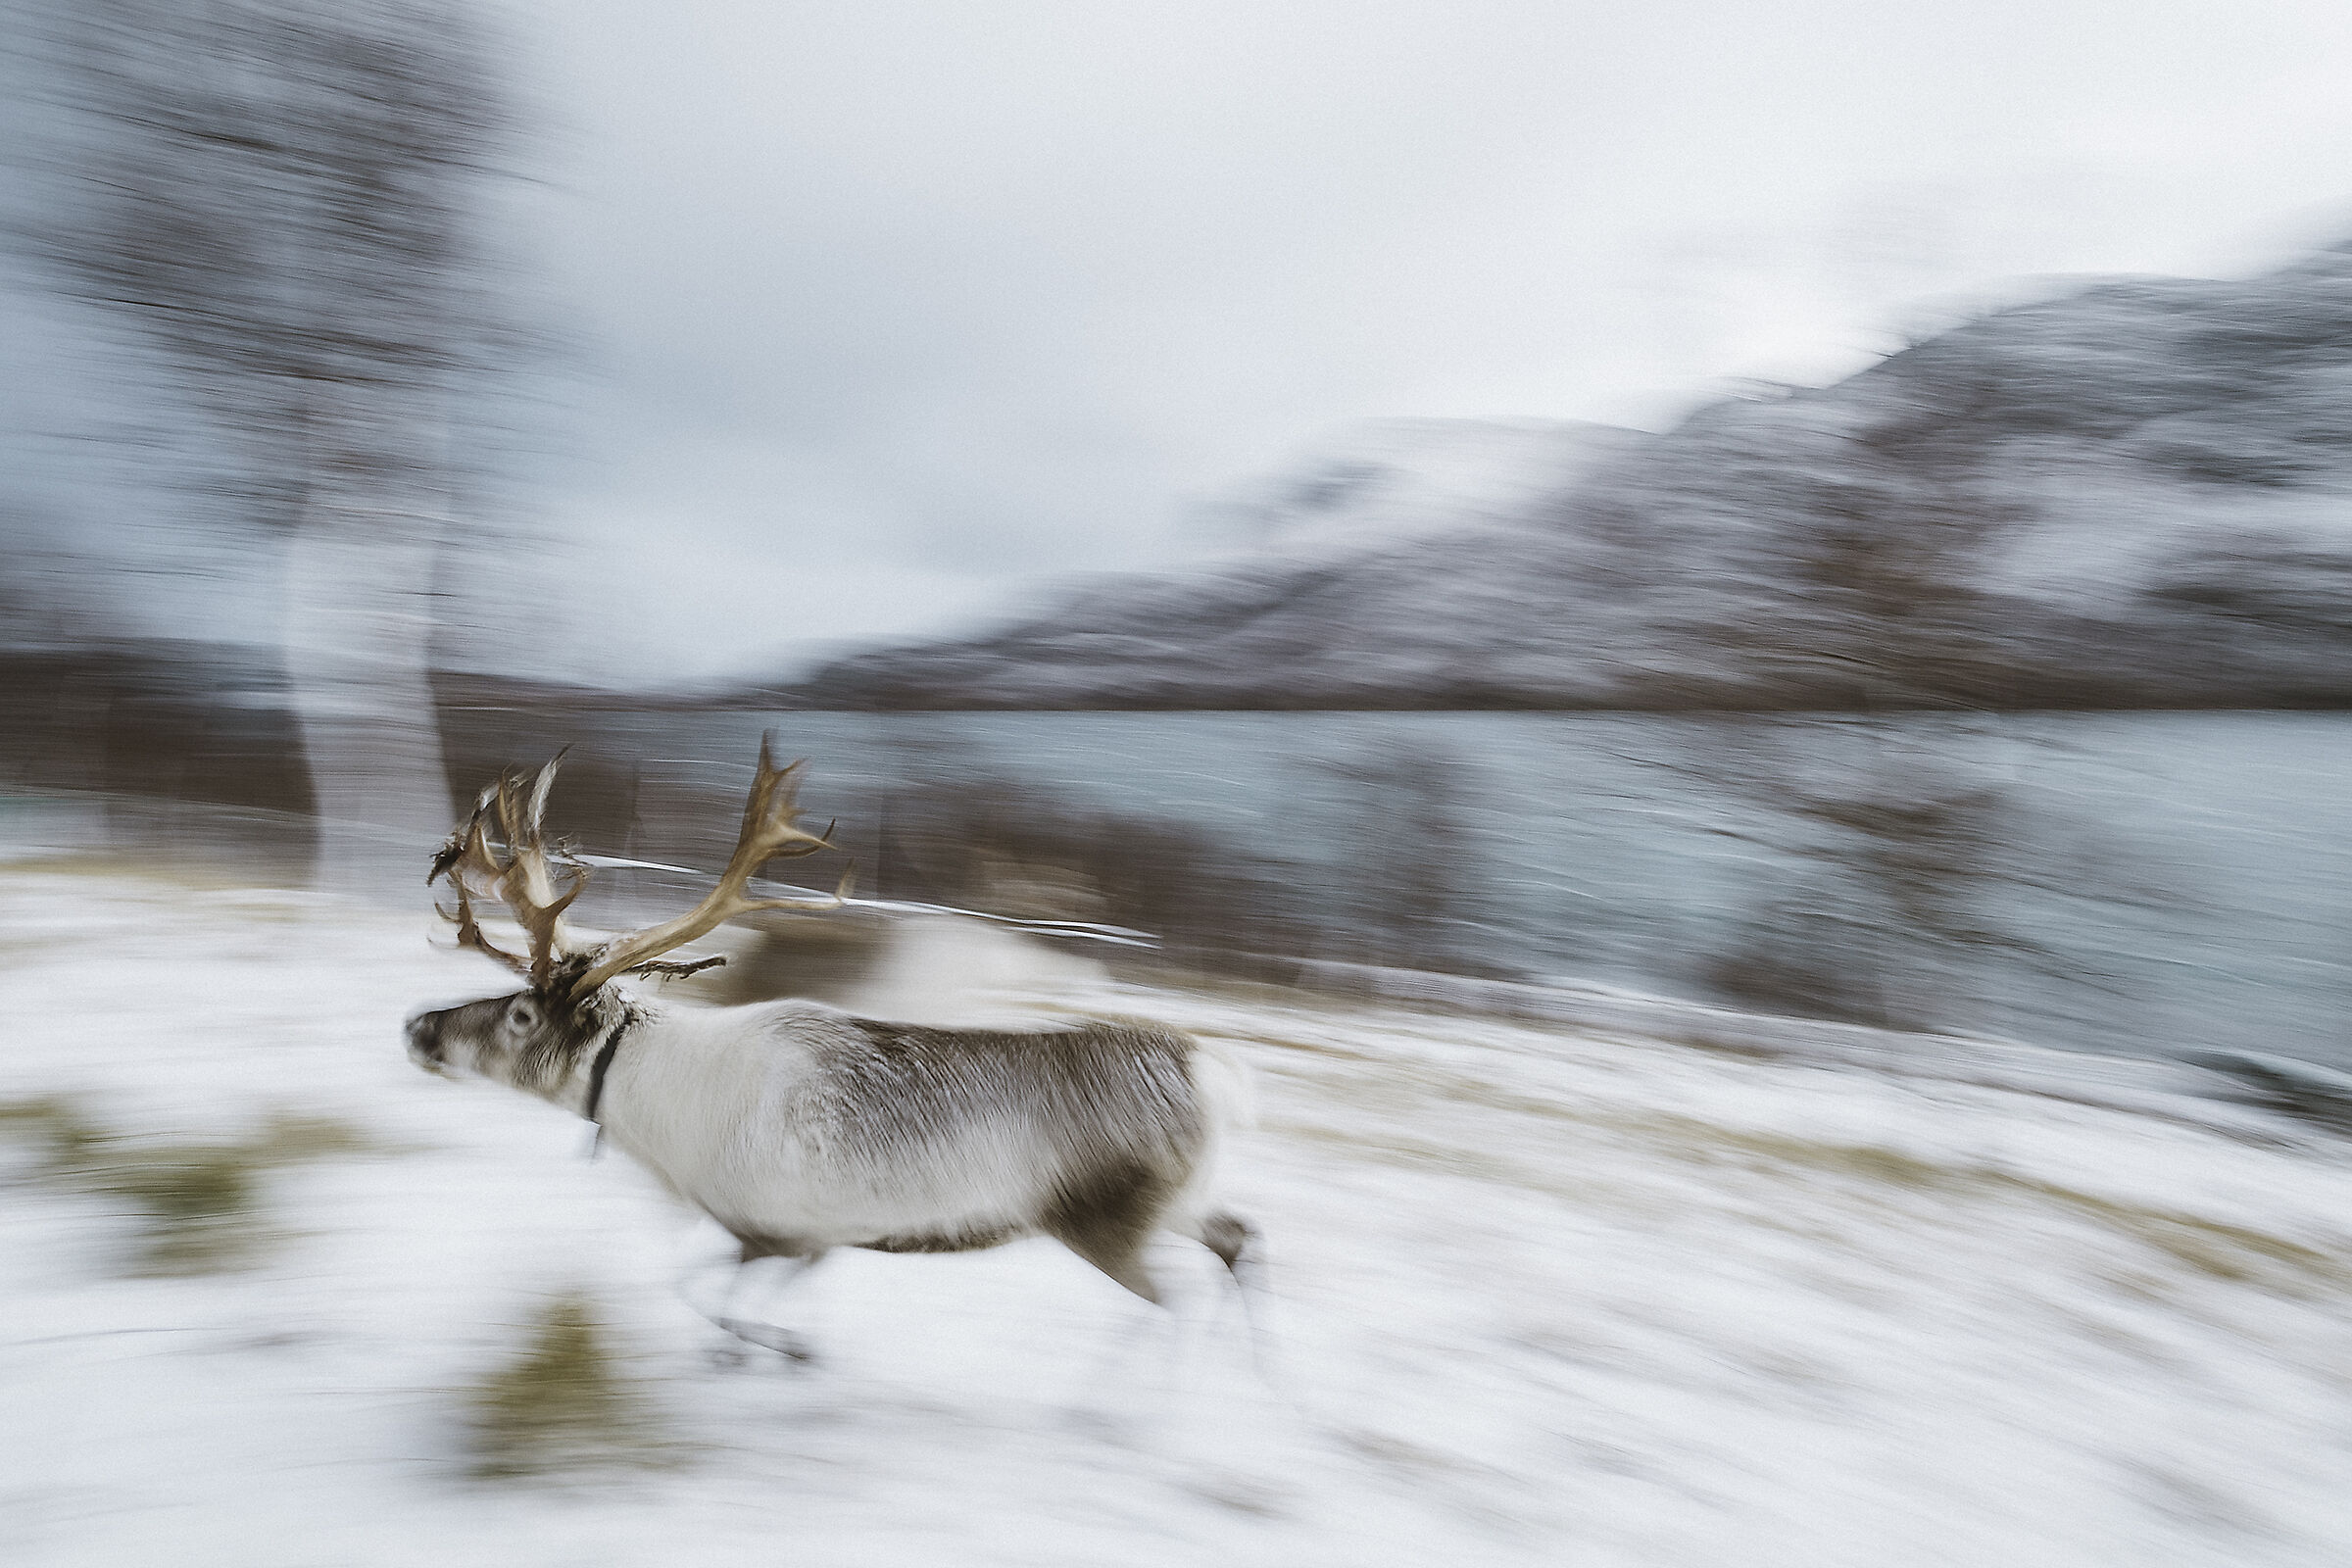 Reindeer on the move...